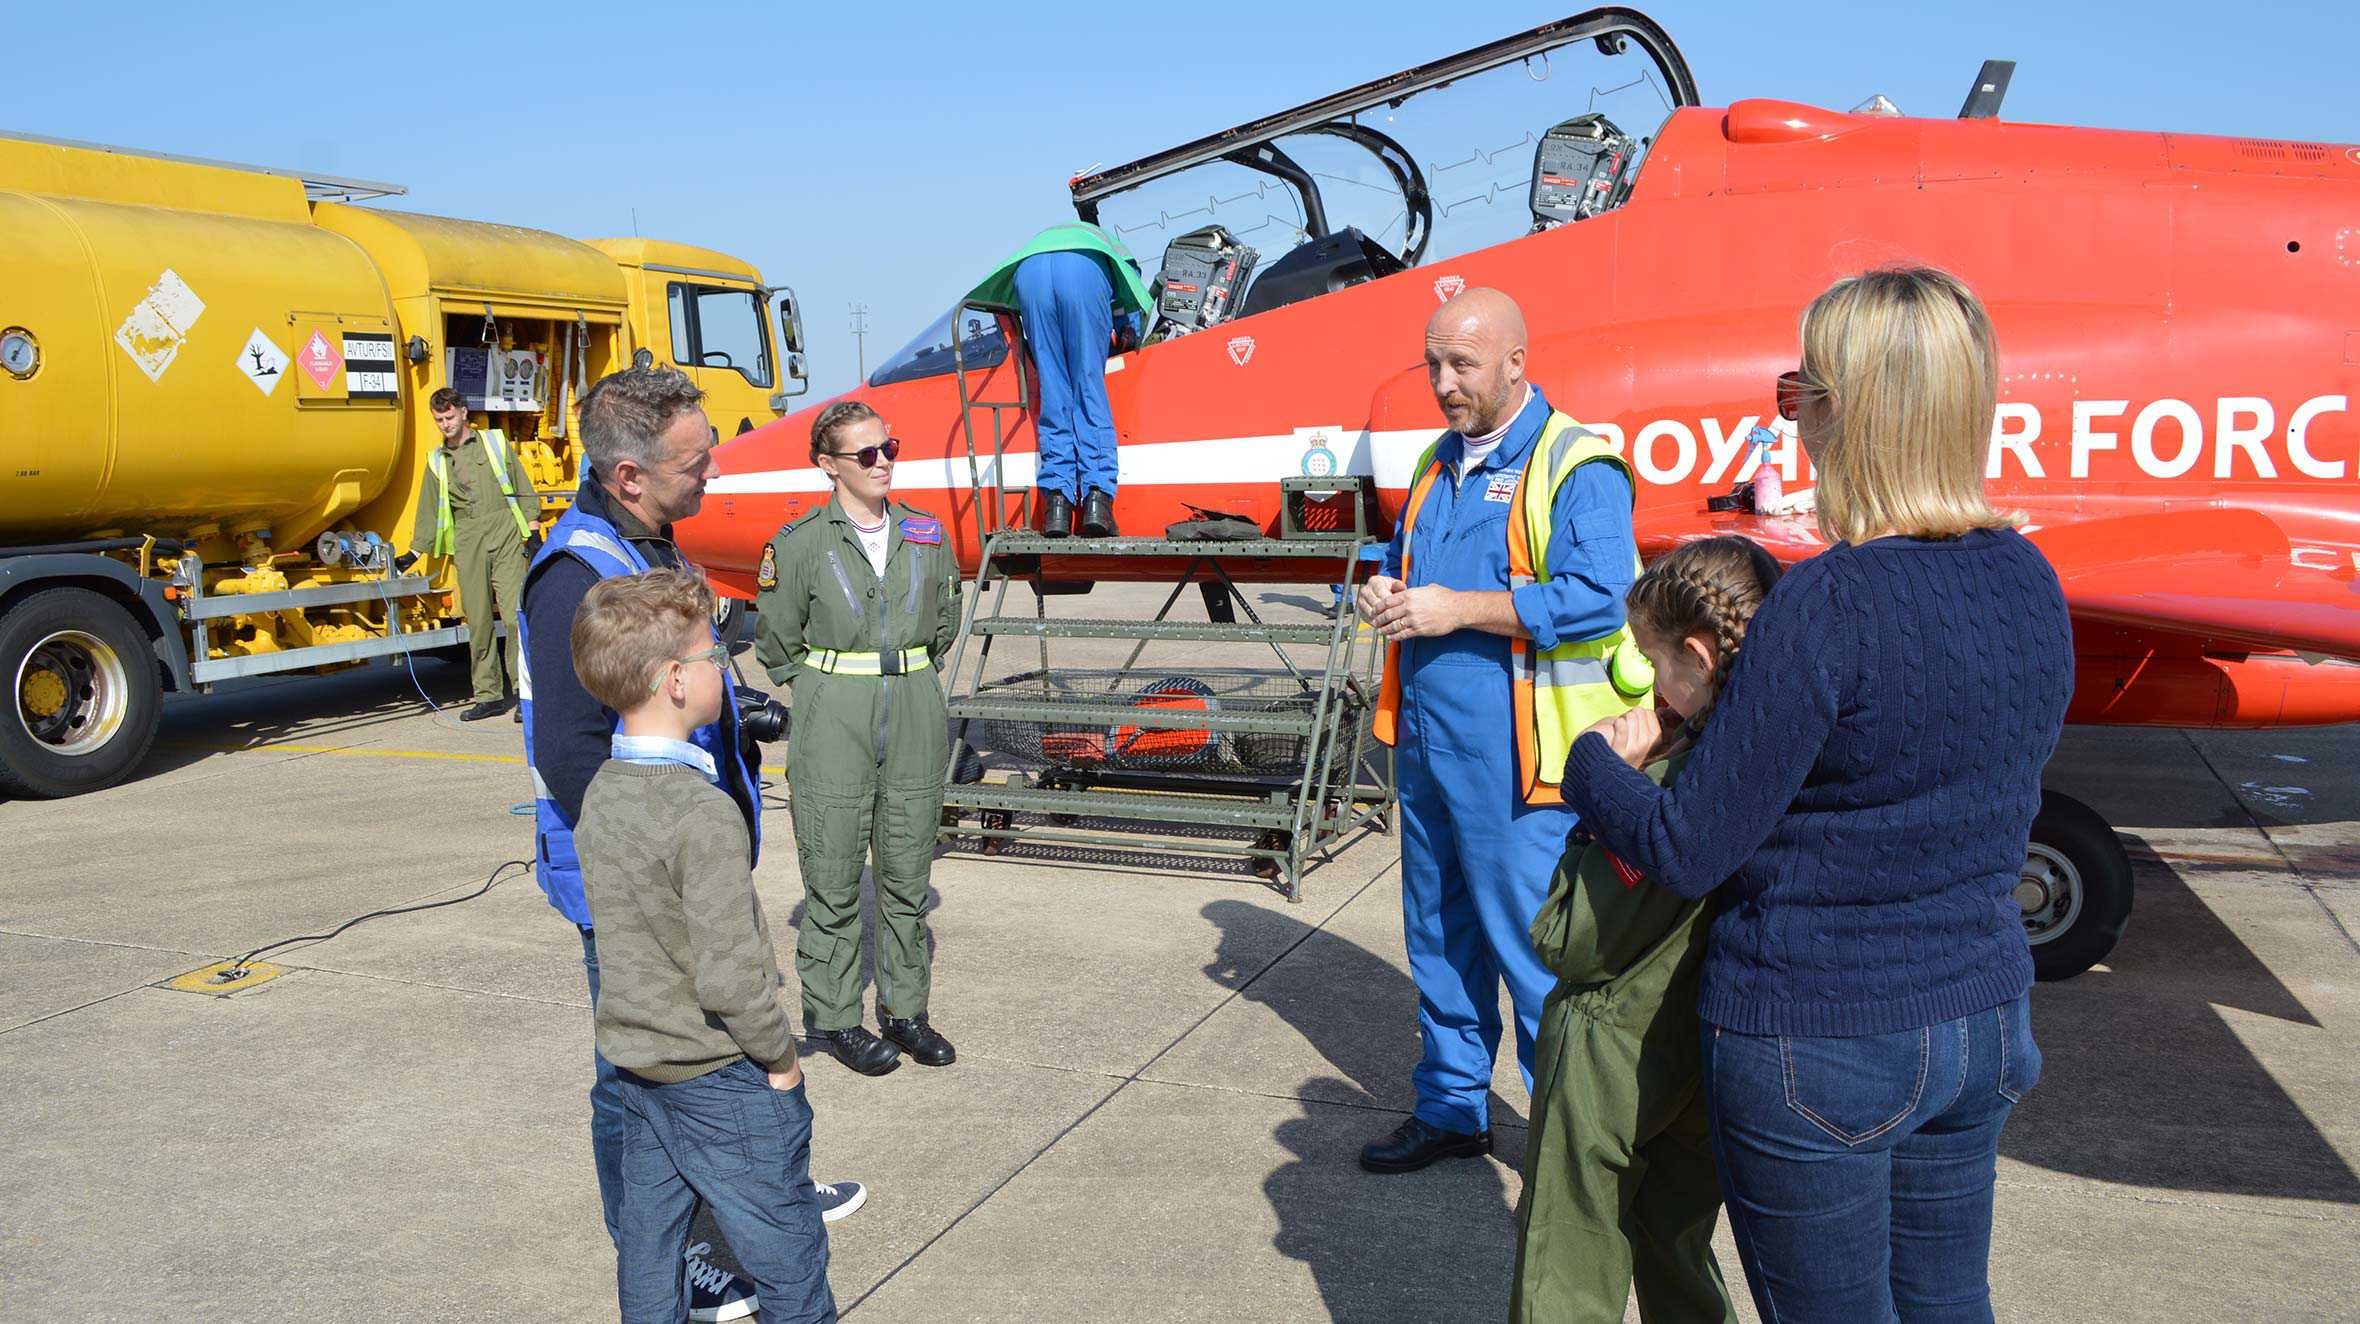 John and his family talking to a member of the ground crew with a Red Arrows jet in the background.